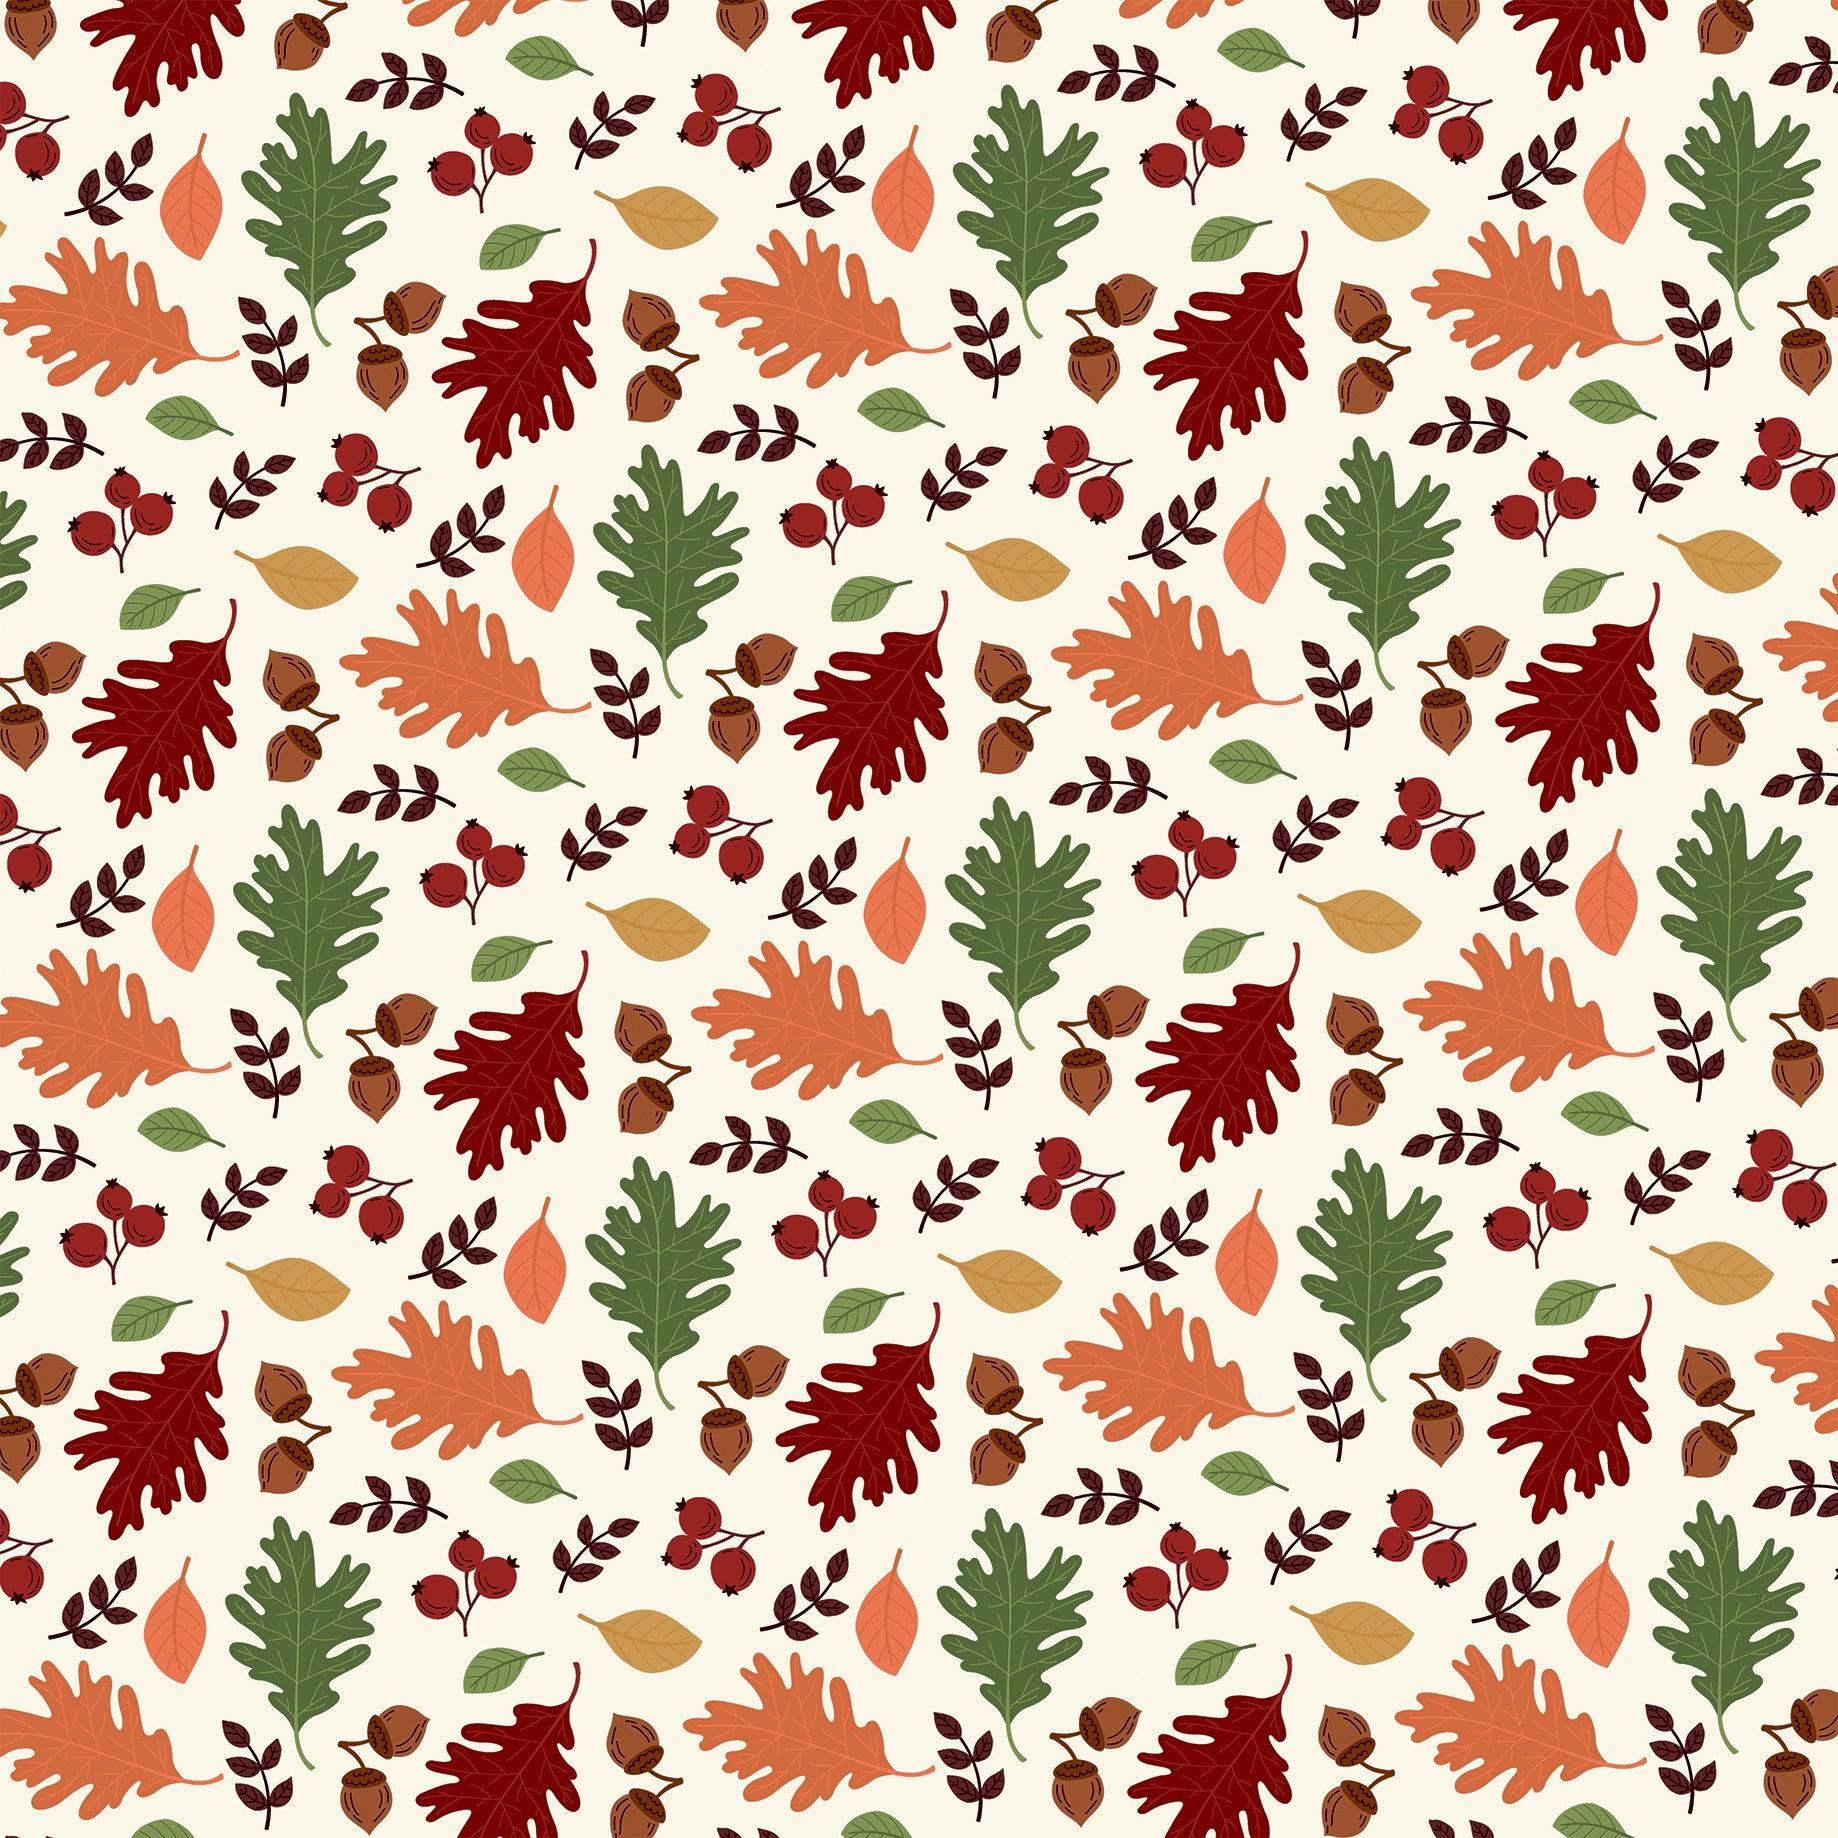 I Love Fall Collection Fall Is Here 12 x 12 Double-Sided Scrapbook Paper by Echo Park Paper - Scrapbook Supply Companies